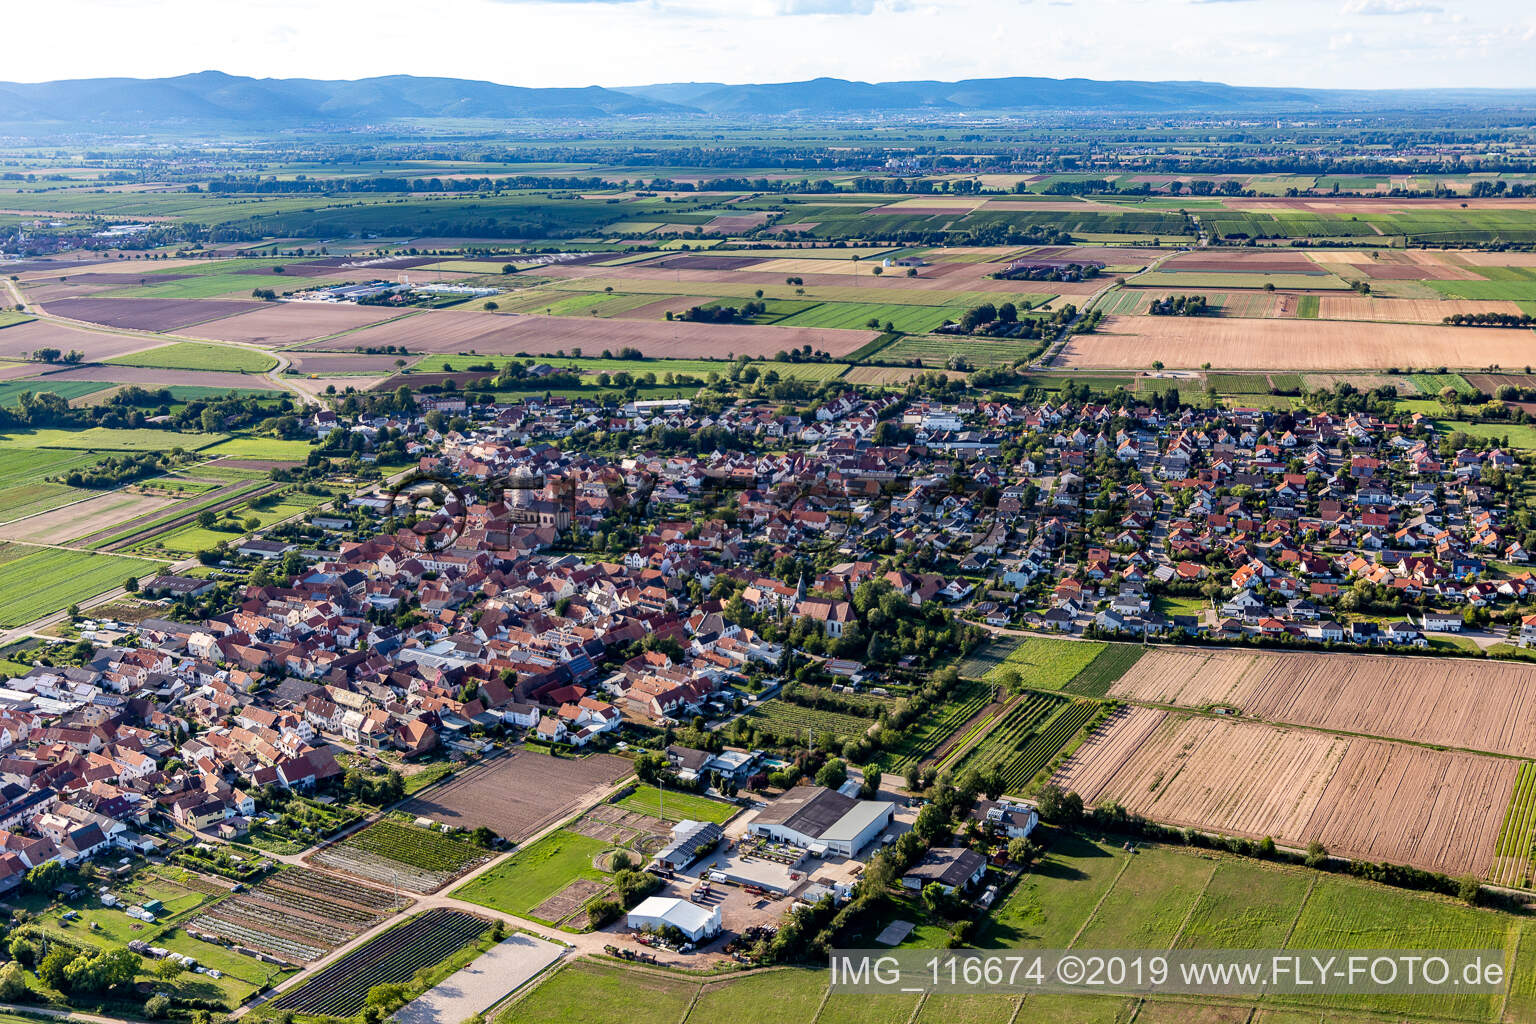 Zeiskam in the state Rhineland-Palatinate, Germany seen from a drone